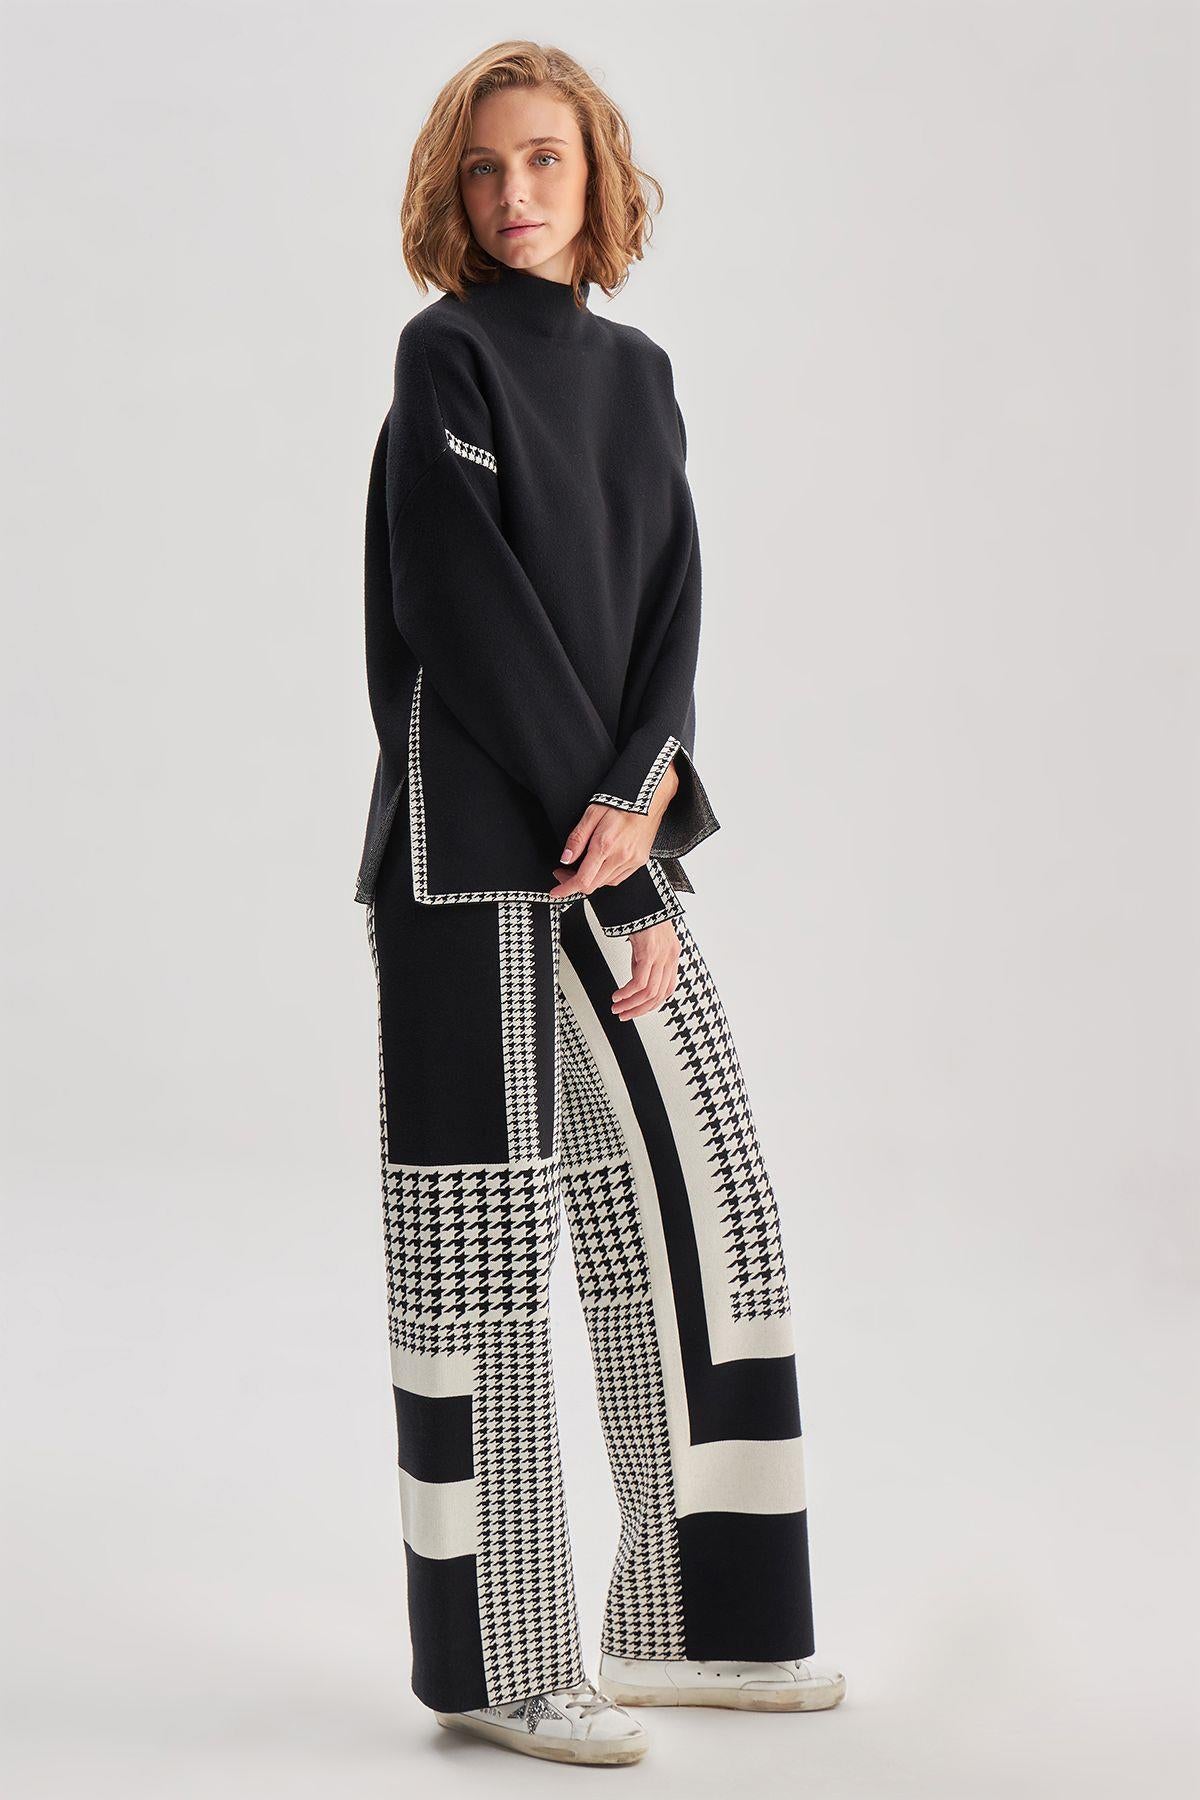 Black and White Patterned Knitwear Trousers